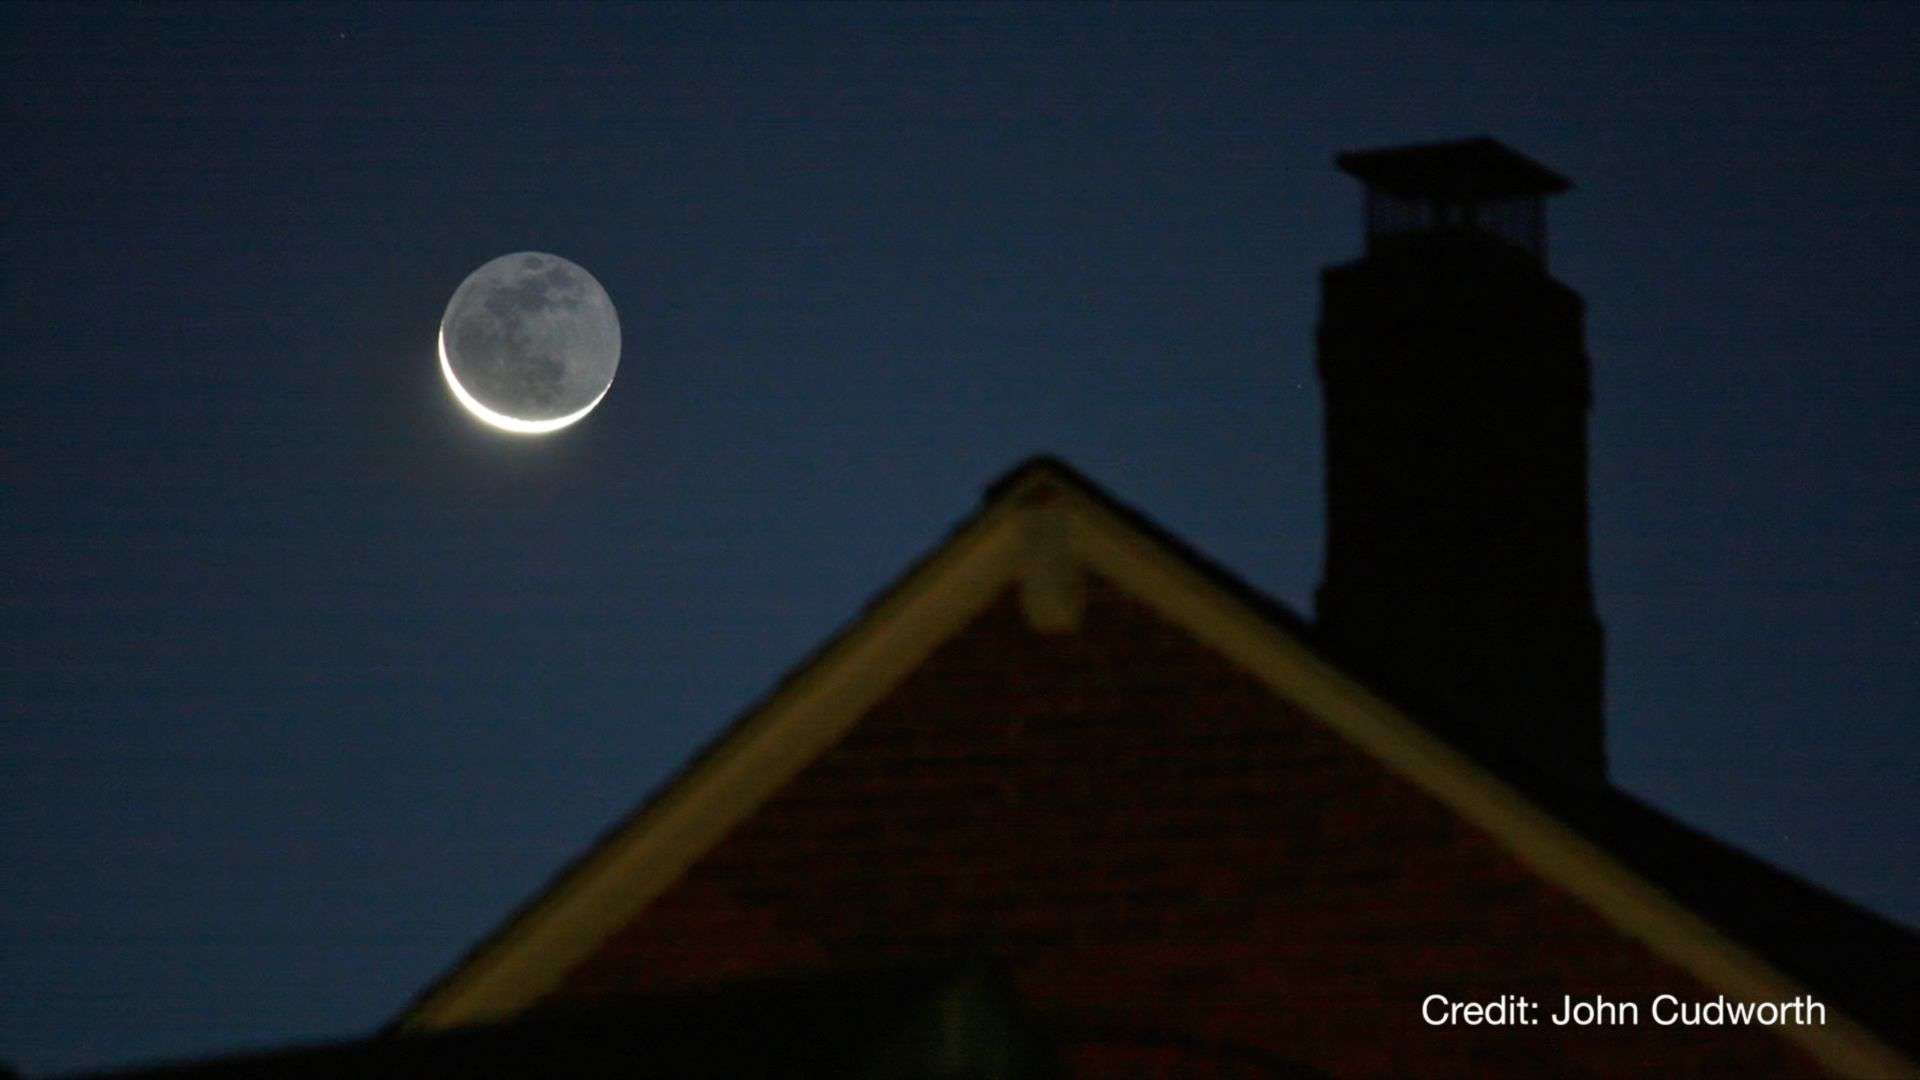 A waning crescent moon with earthshine